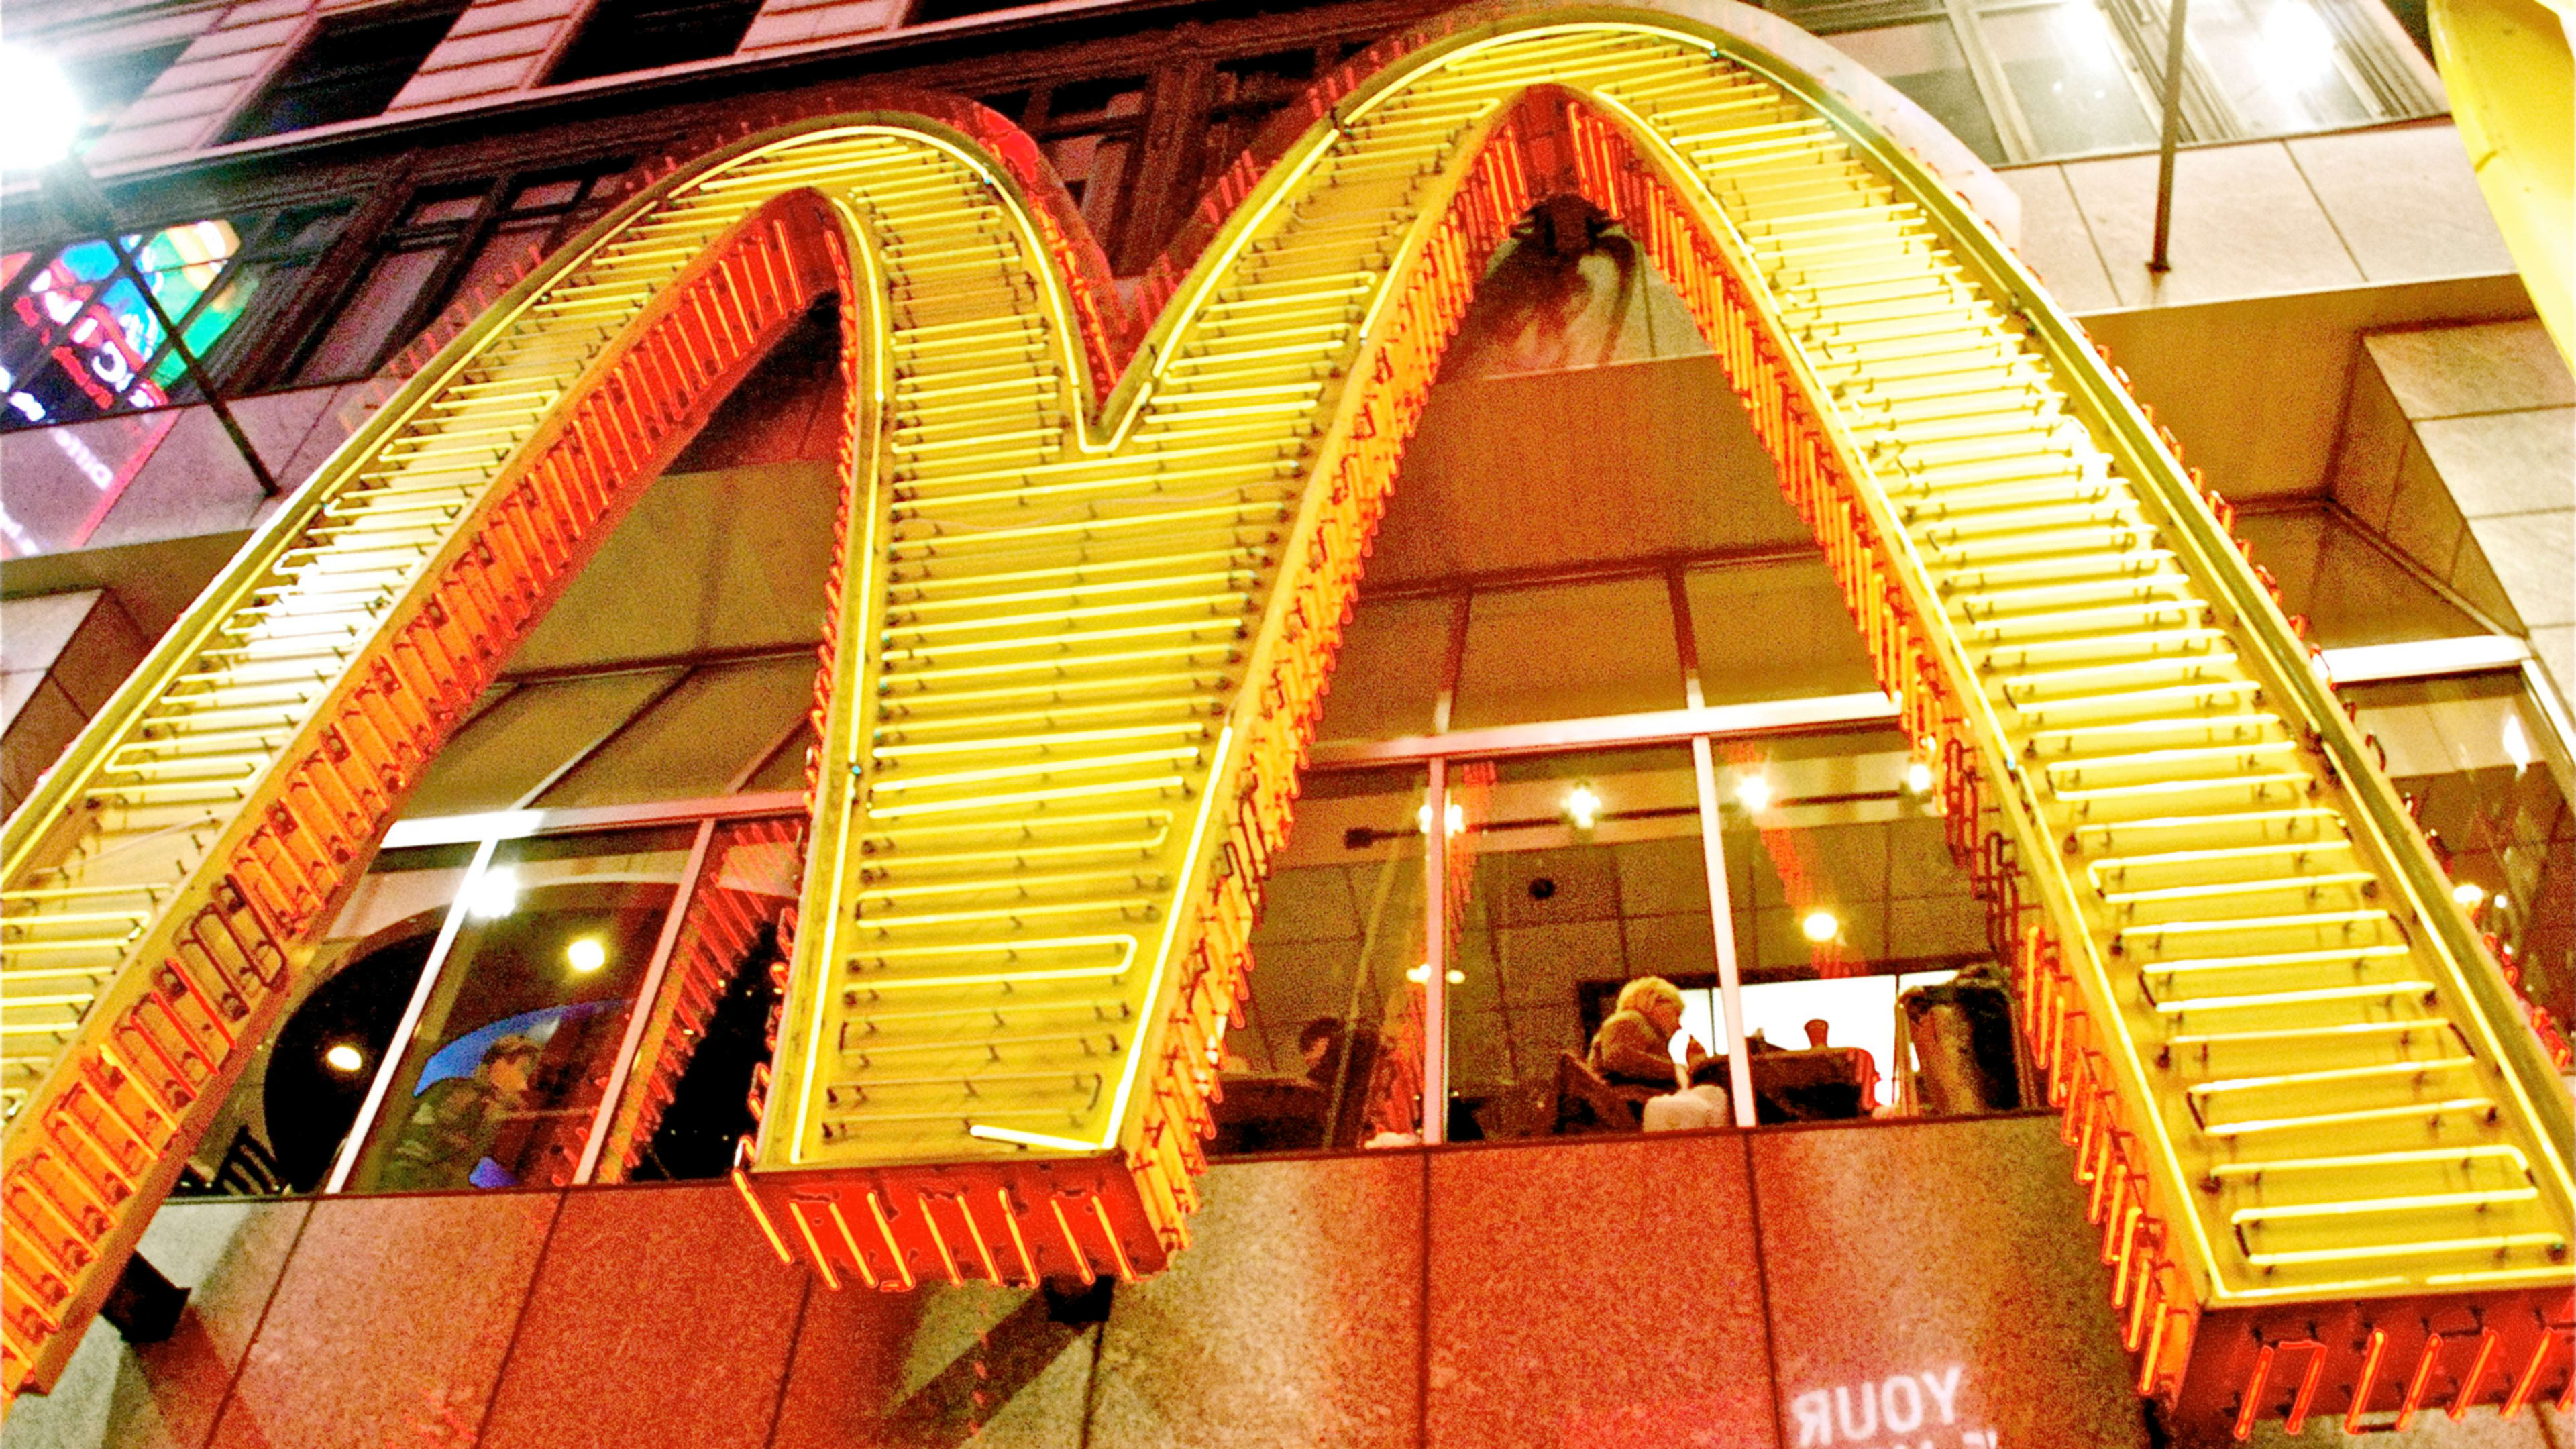 McDonald’s corporate employees brace for a major U.S. restructuring